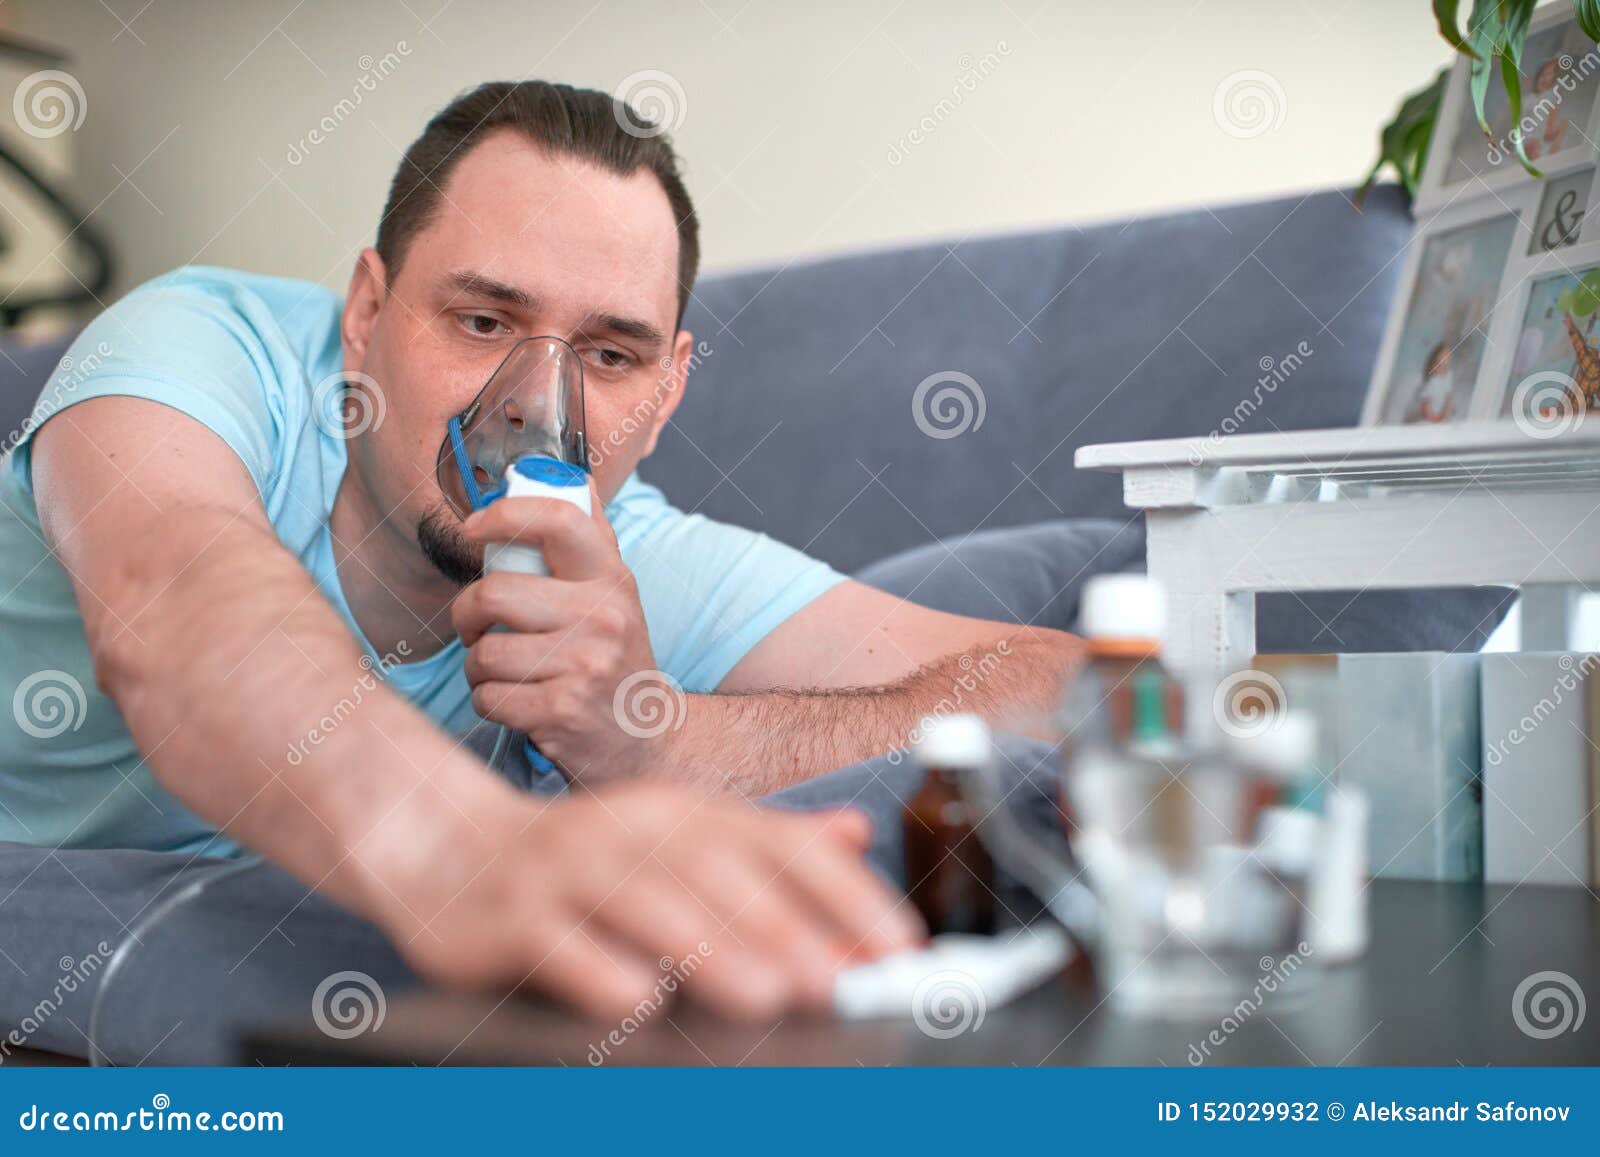 a sick man breathes through an inhaler mask. lying on the couch and pulls his hand to the cure